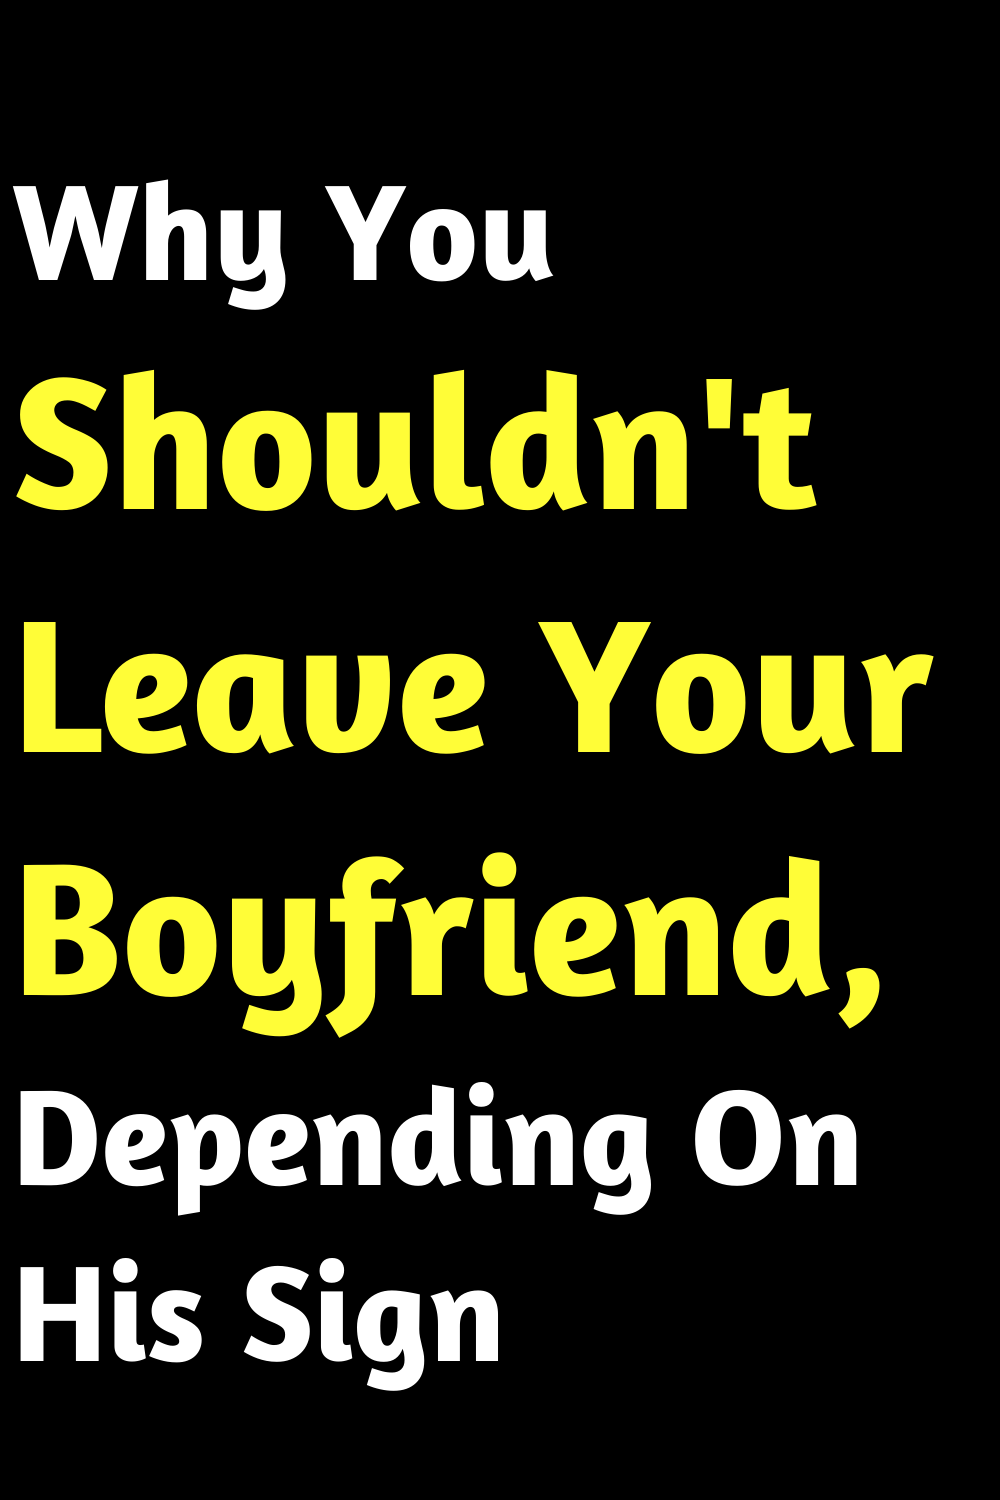 Why You Shouldn't Leave Your Boyfriend, Depending On His Sign